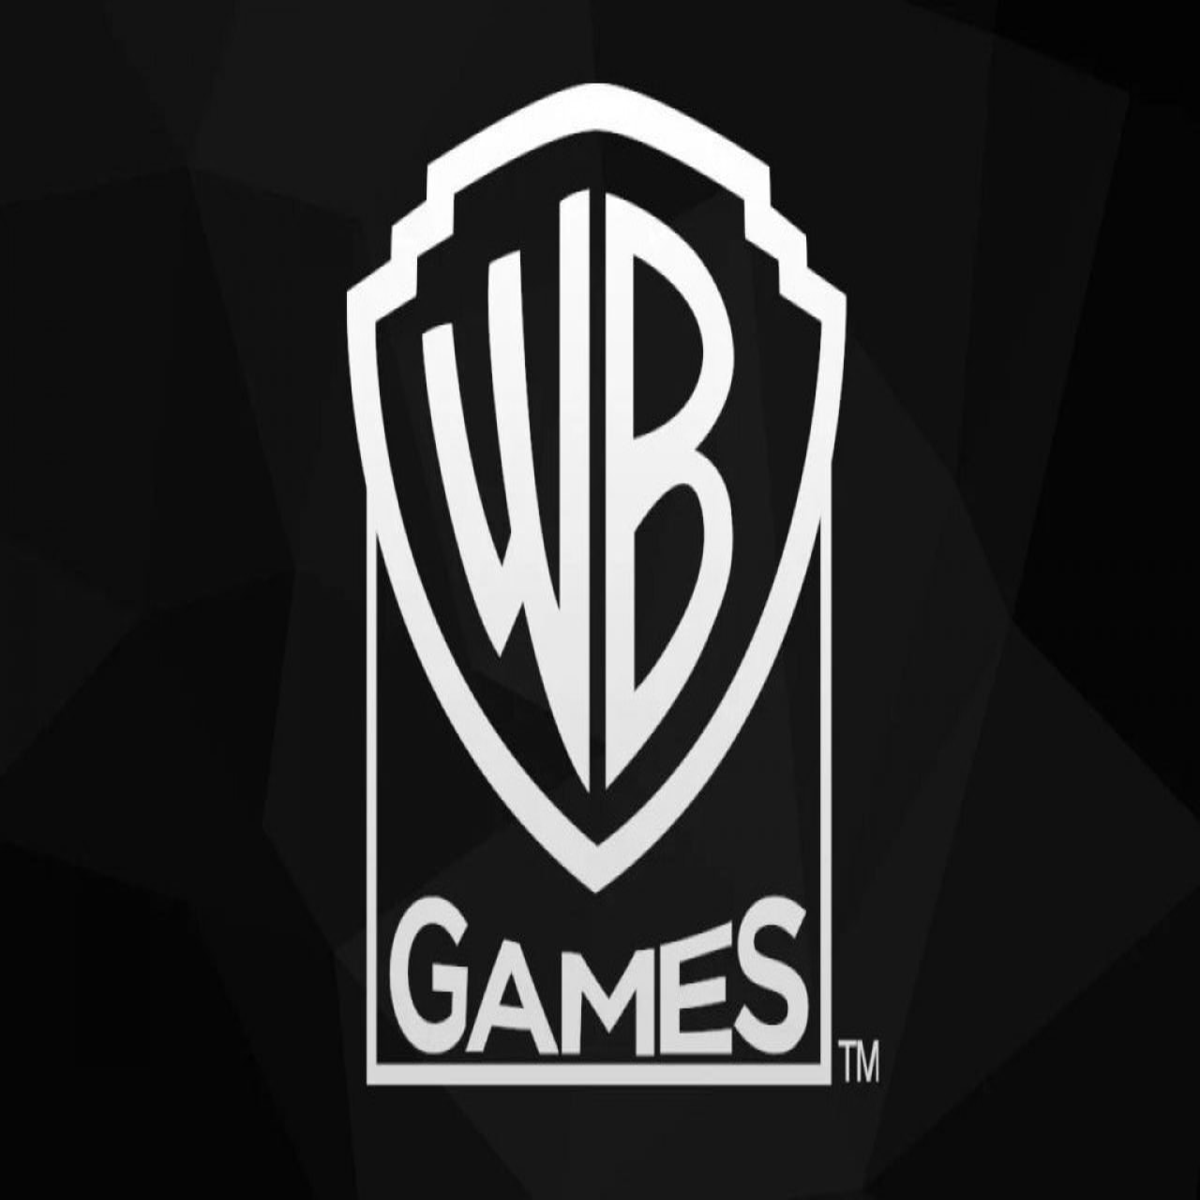 Warner Bros. Interactive Entertainment Video Games for sale